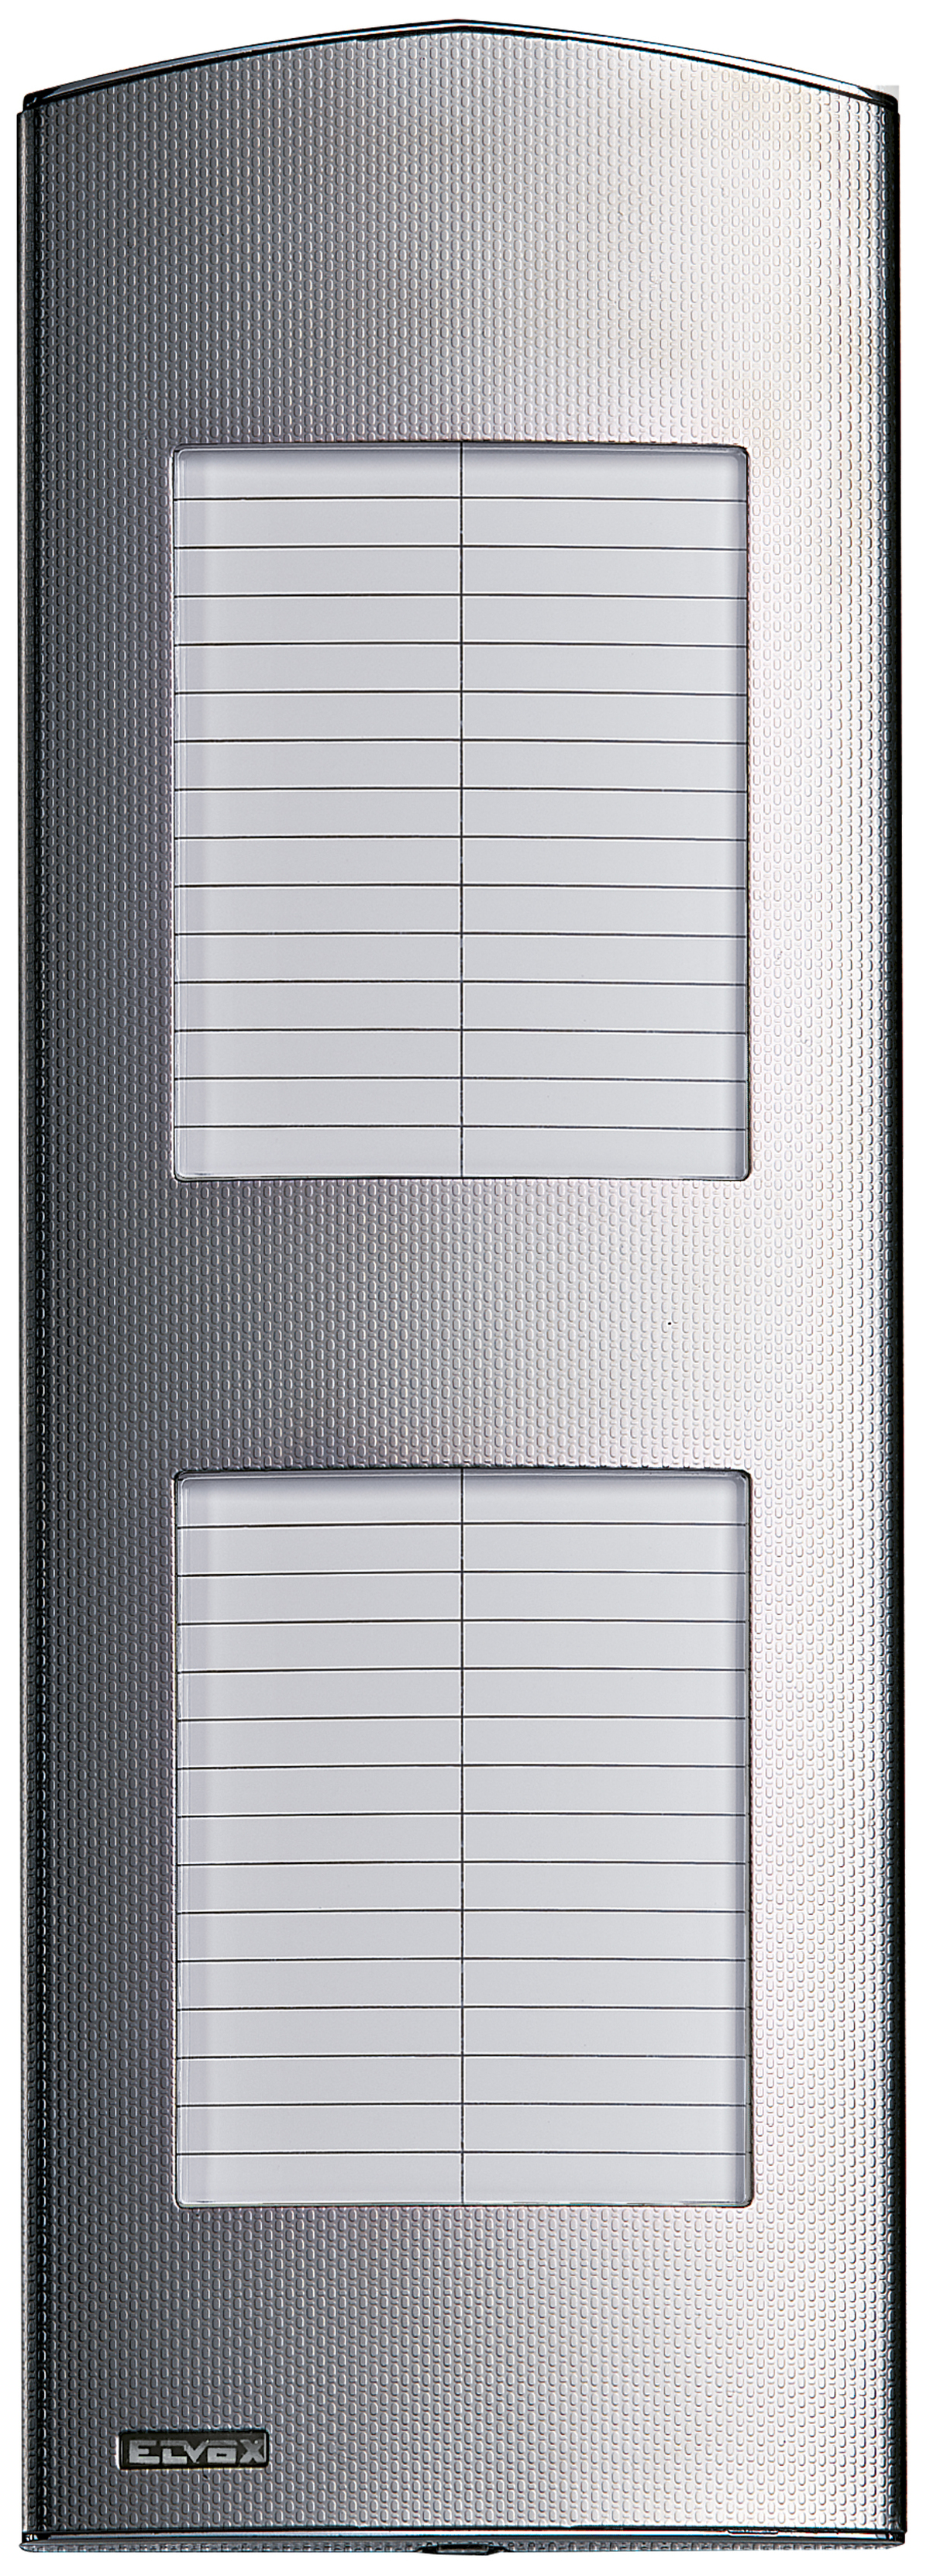 2-MODULE ADDITIONAL COVER PLATE WITH 2 CARDS FOR 15+15 NAMES W/ CARD LIGHTING STAINLESS STEEL